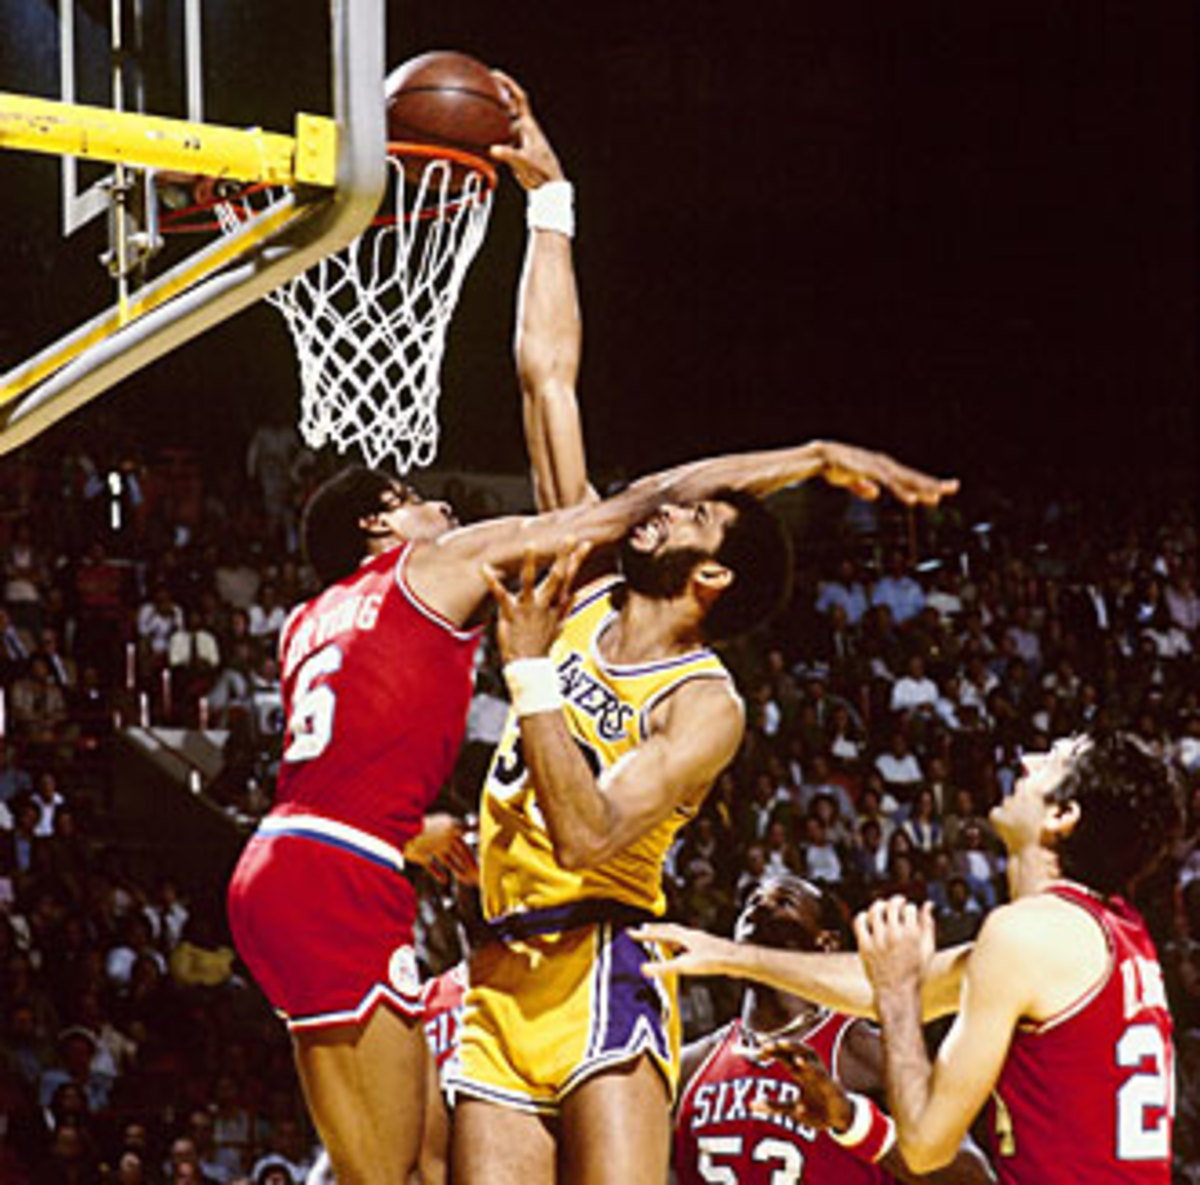 Jabbar helped the Lakers dunk Julius Erving and the 76ers in the 1980 NBA Finals.